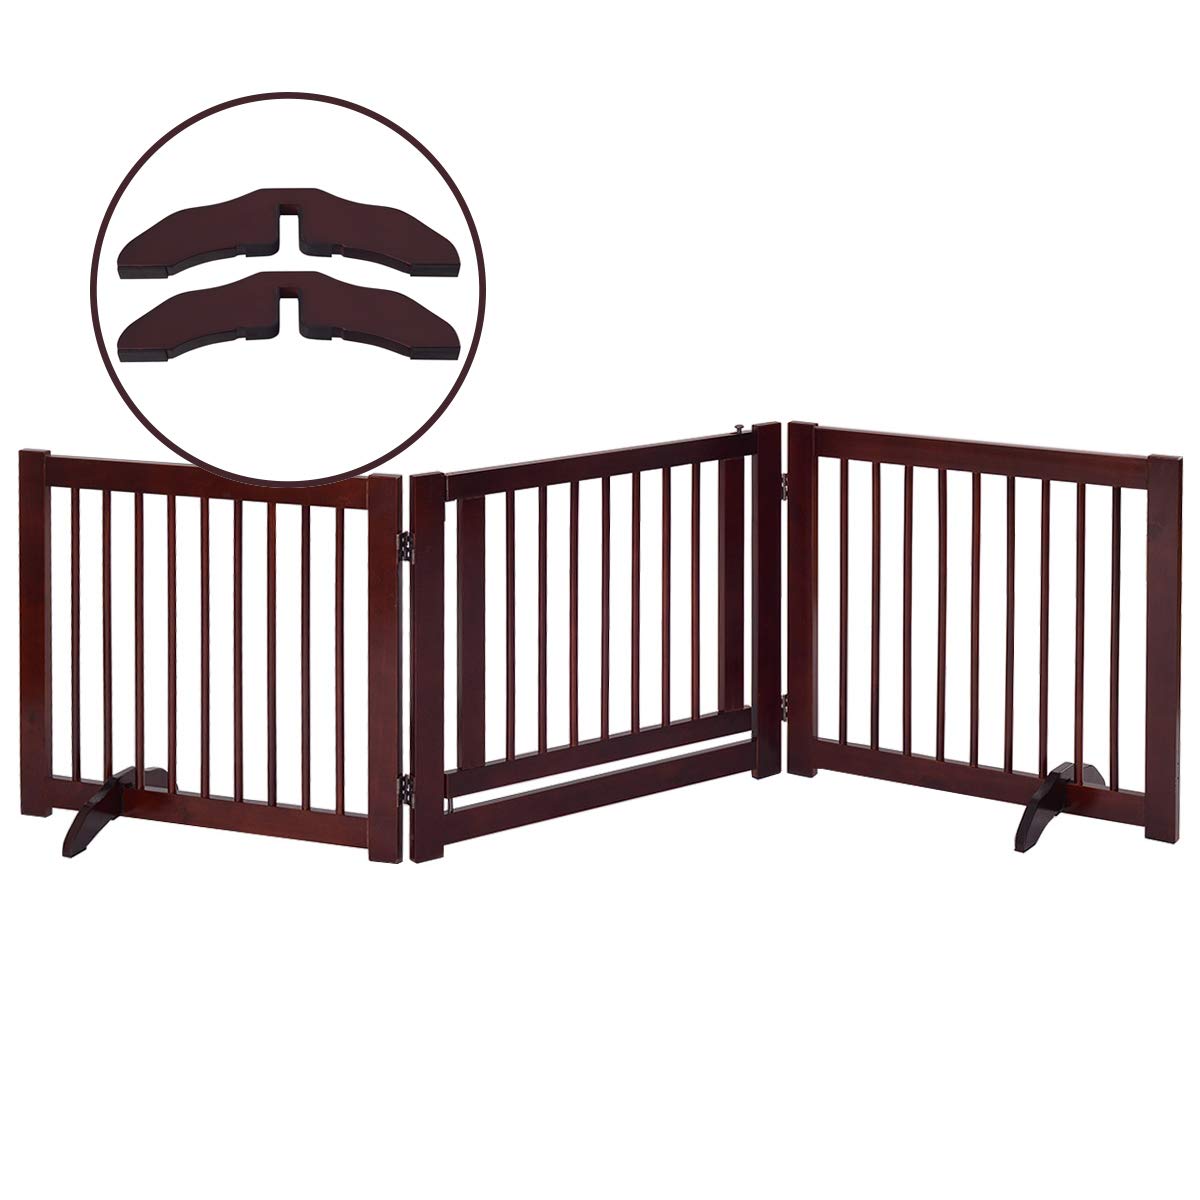 Giantex 24inch Freestanding Wood Dog Gate with Walk Through Door and 2PCS Support Feet (24 inch)